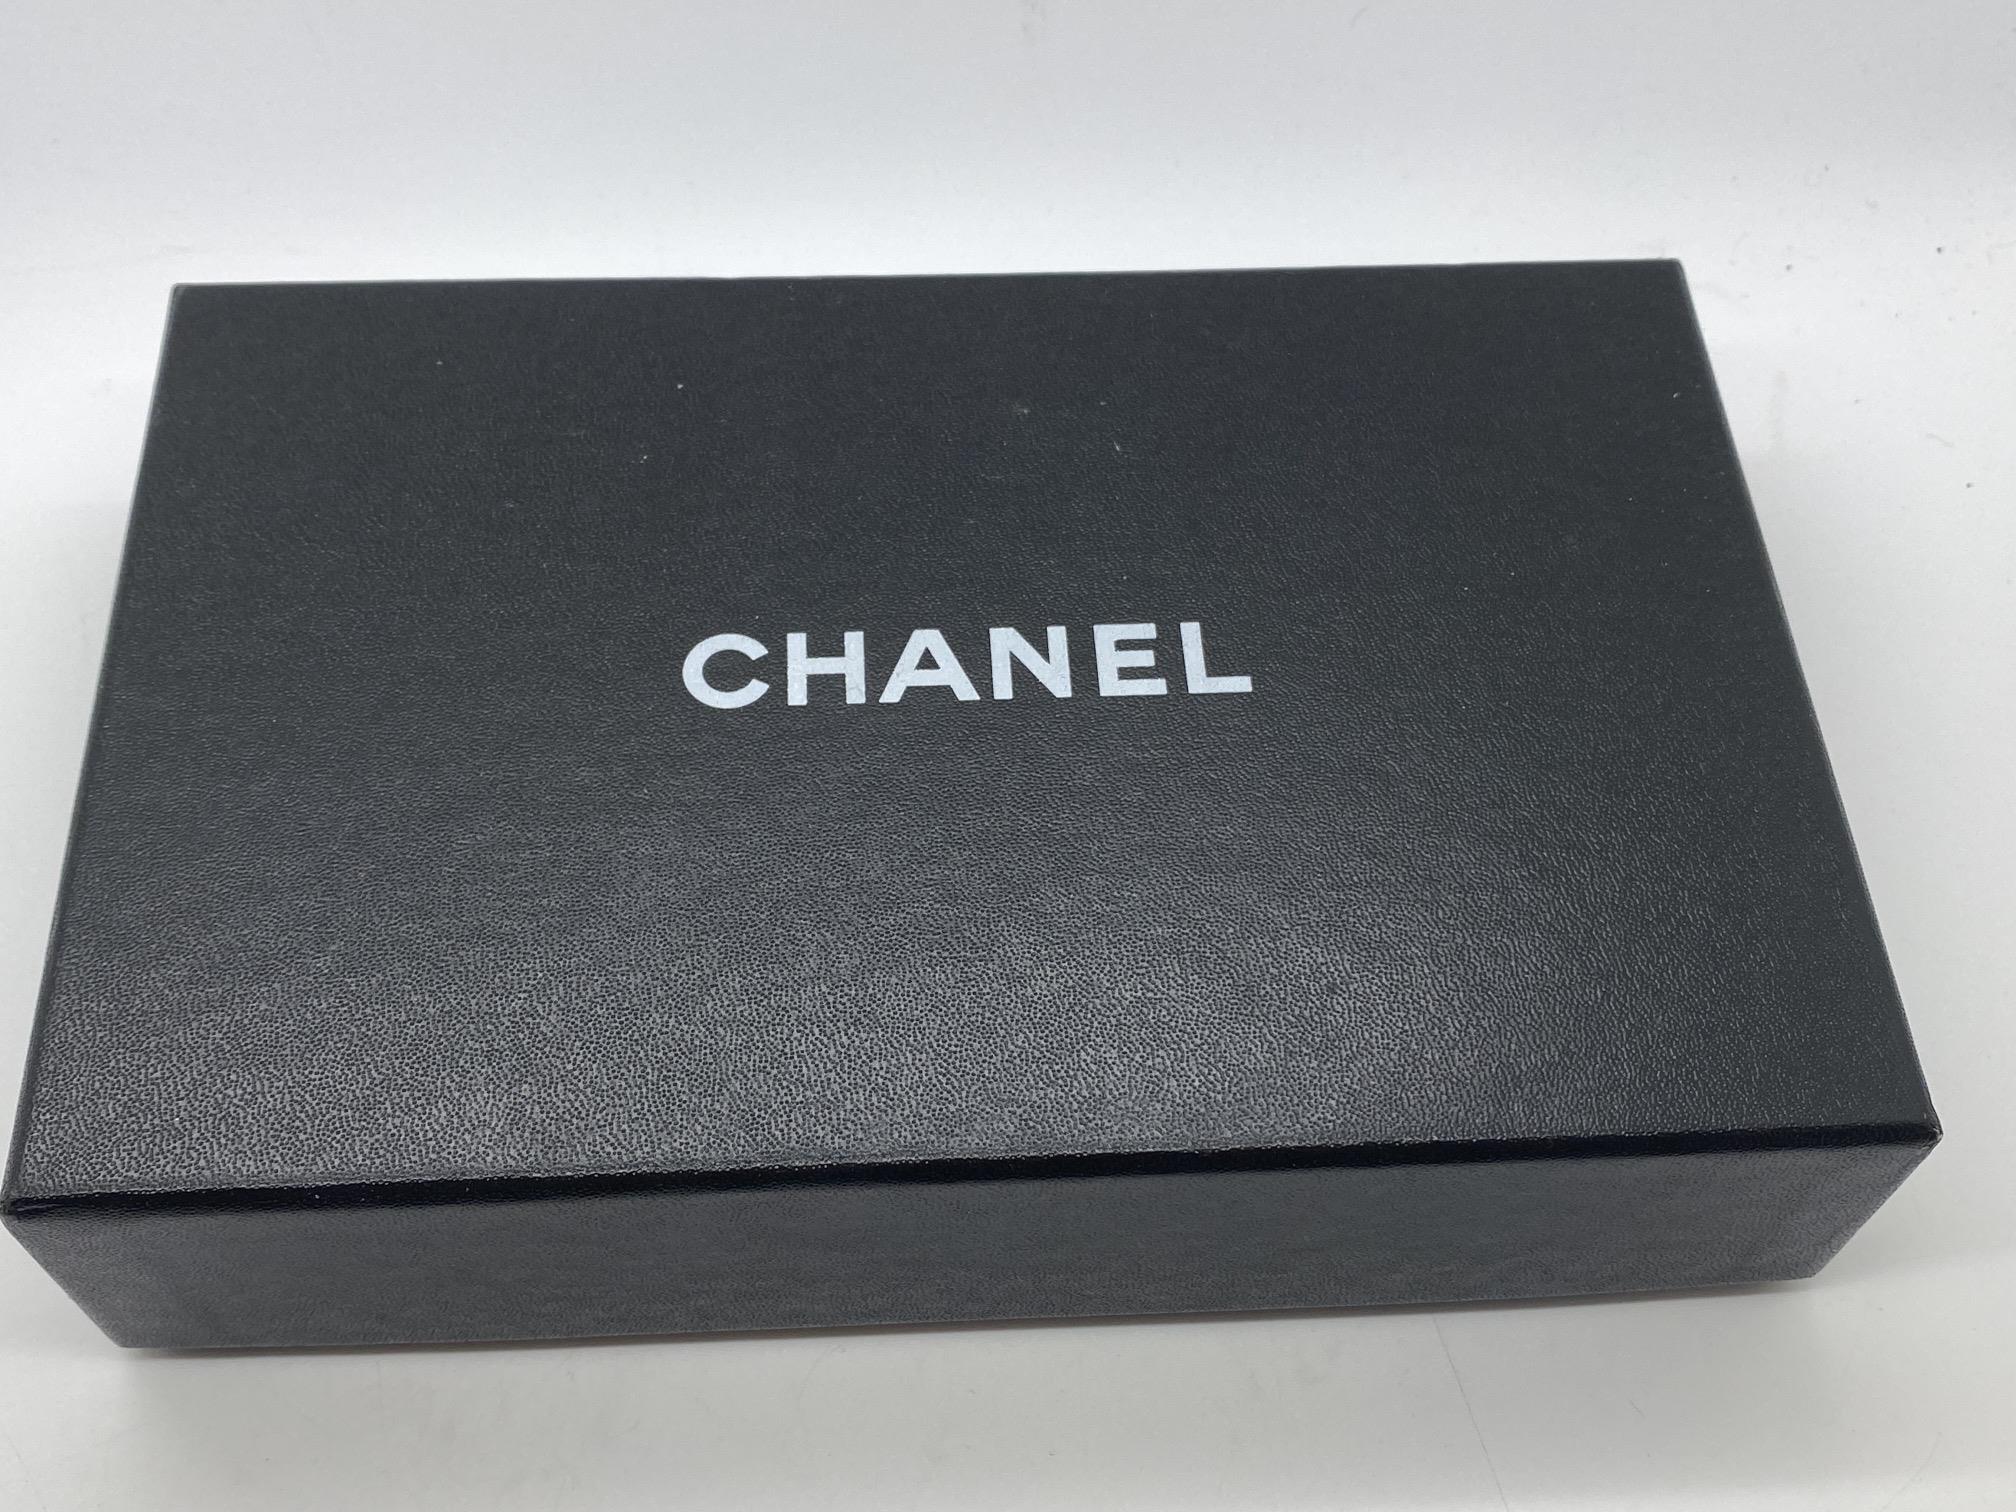 CHANEL WALLET PURSE WITH ORIGINAL BOX - Image 4 of 8